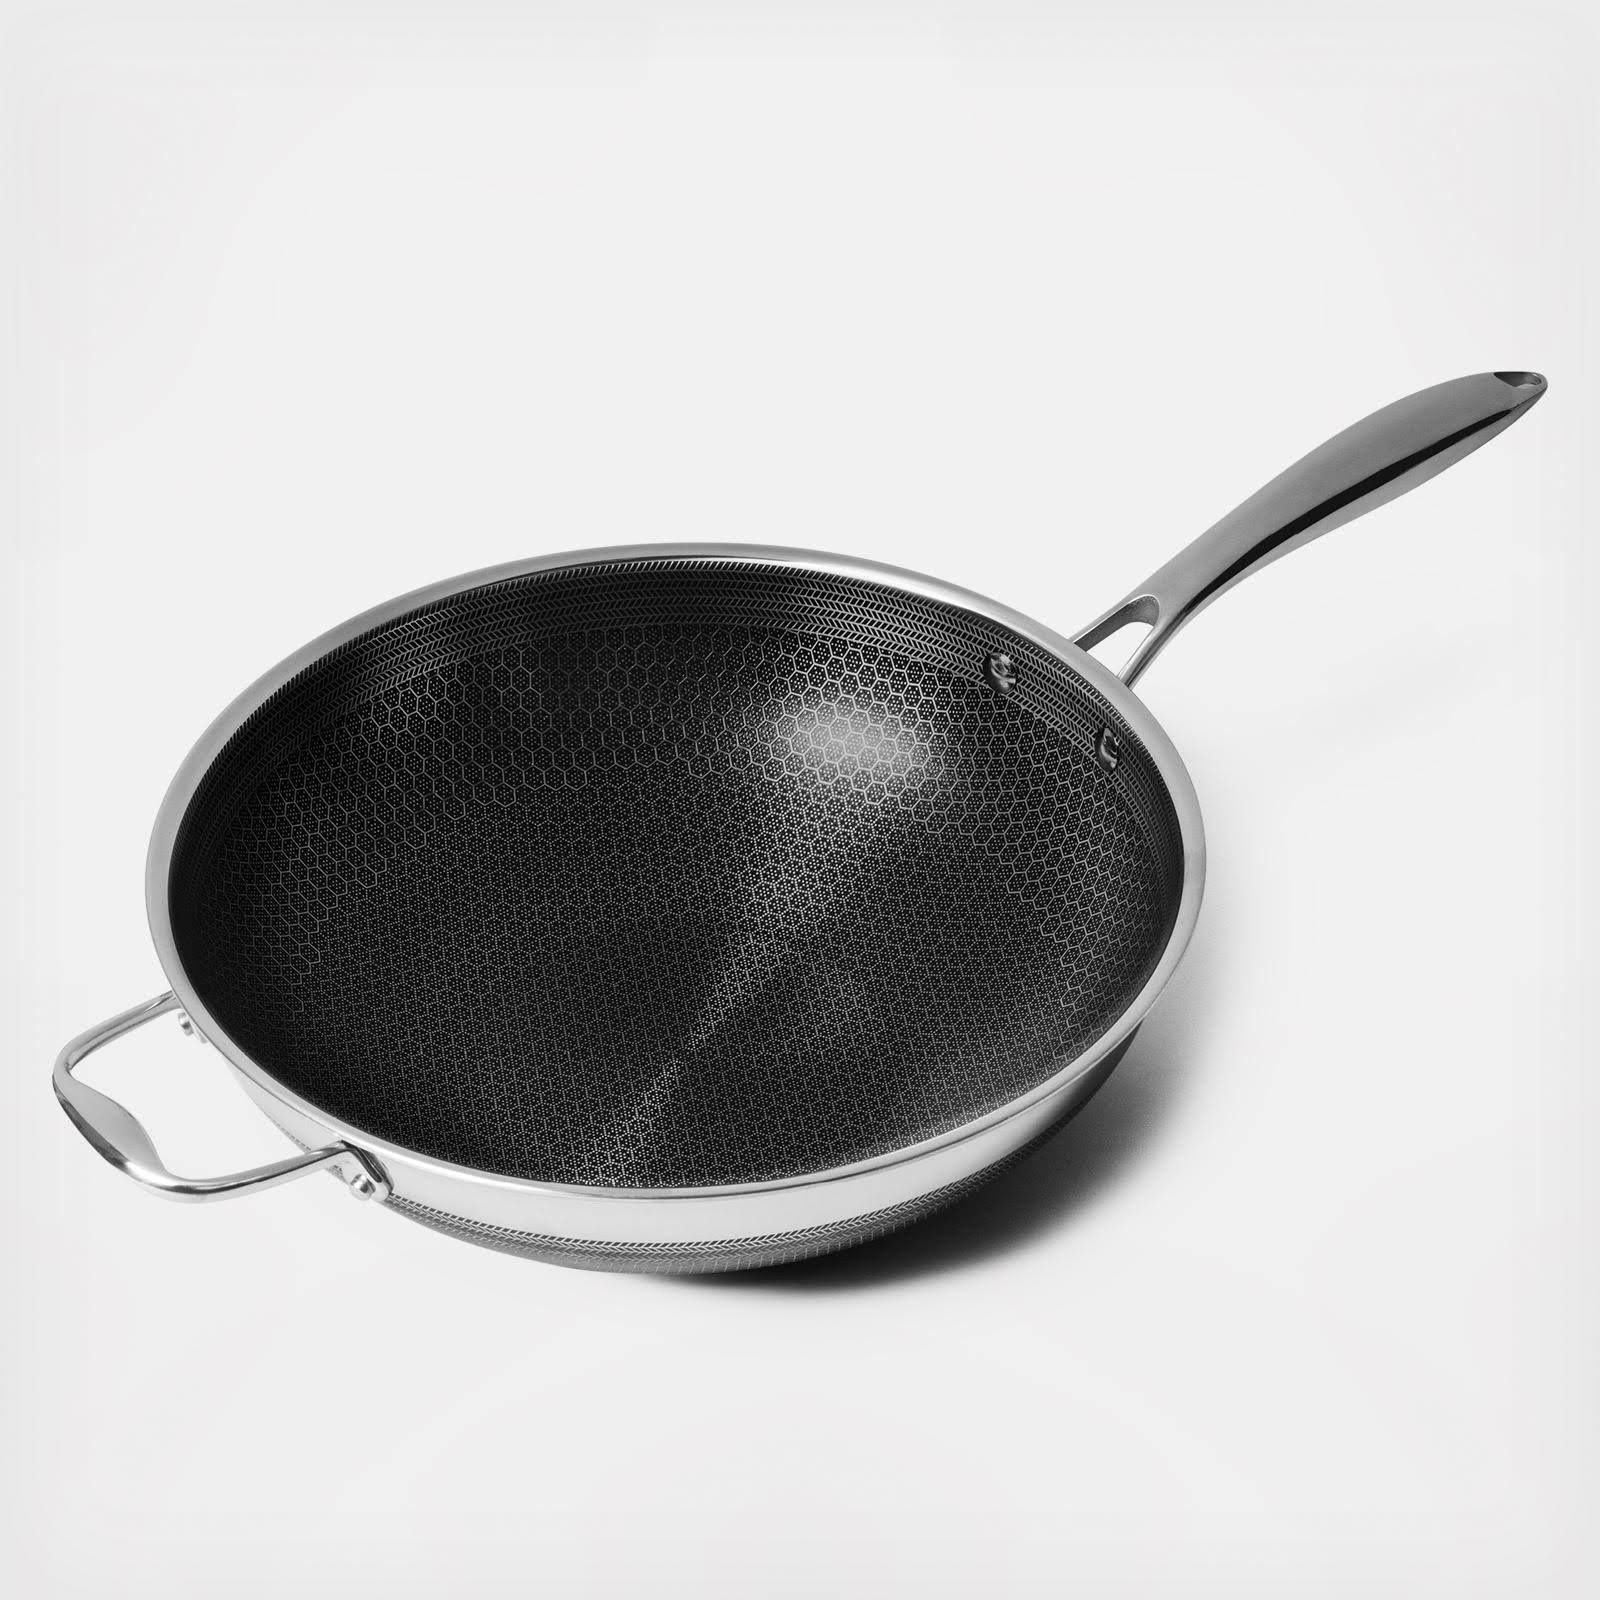 HexClad - Our 12” Hybrid Wok is currently on sale for 30% off for a limited  time! The HexClad Wok is 12” across and 3” deep, allowing for high volume  cooking and